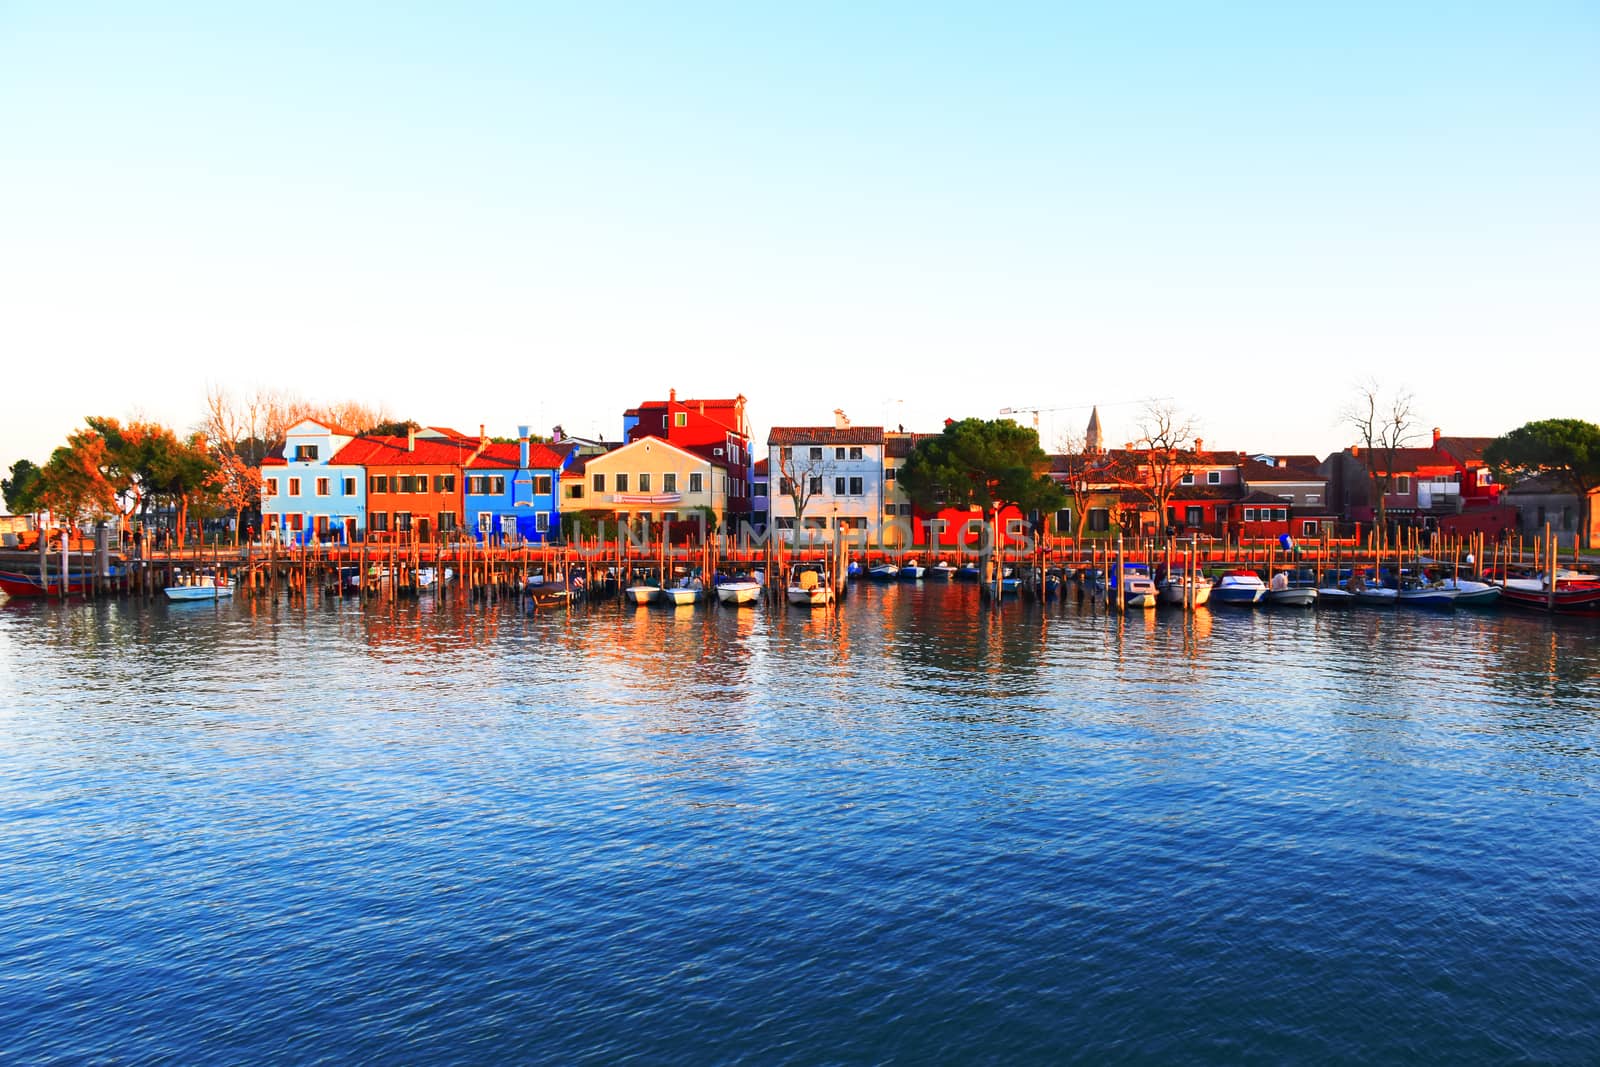 The colorful village of Burano, with its characteristic leaning bell tower, is reflected in the waters of the Venetian lagoon.